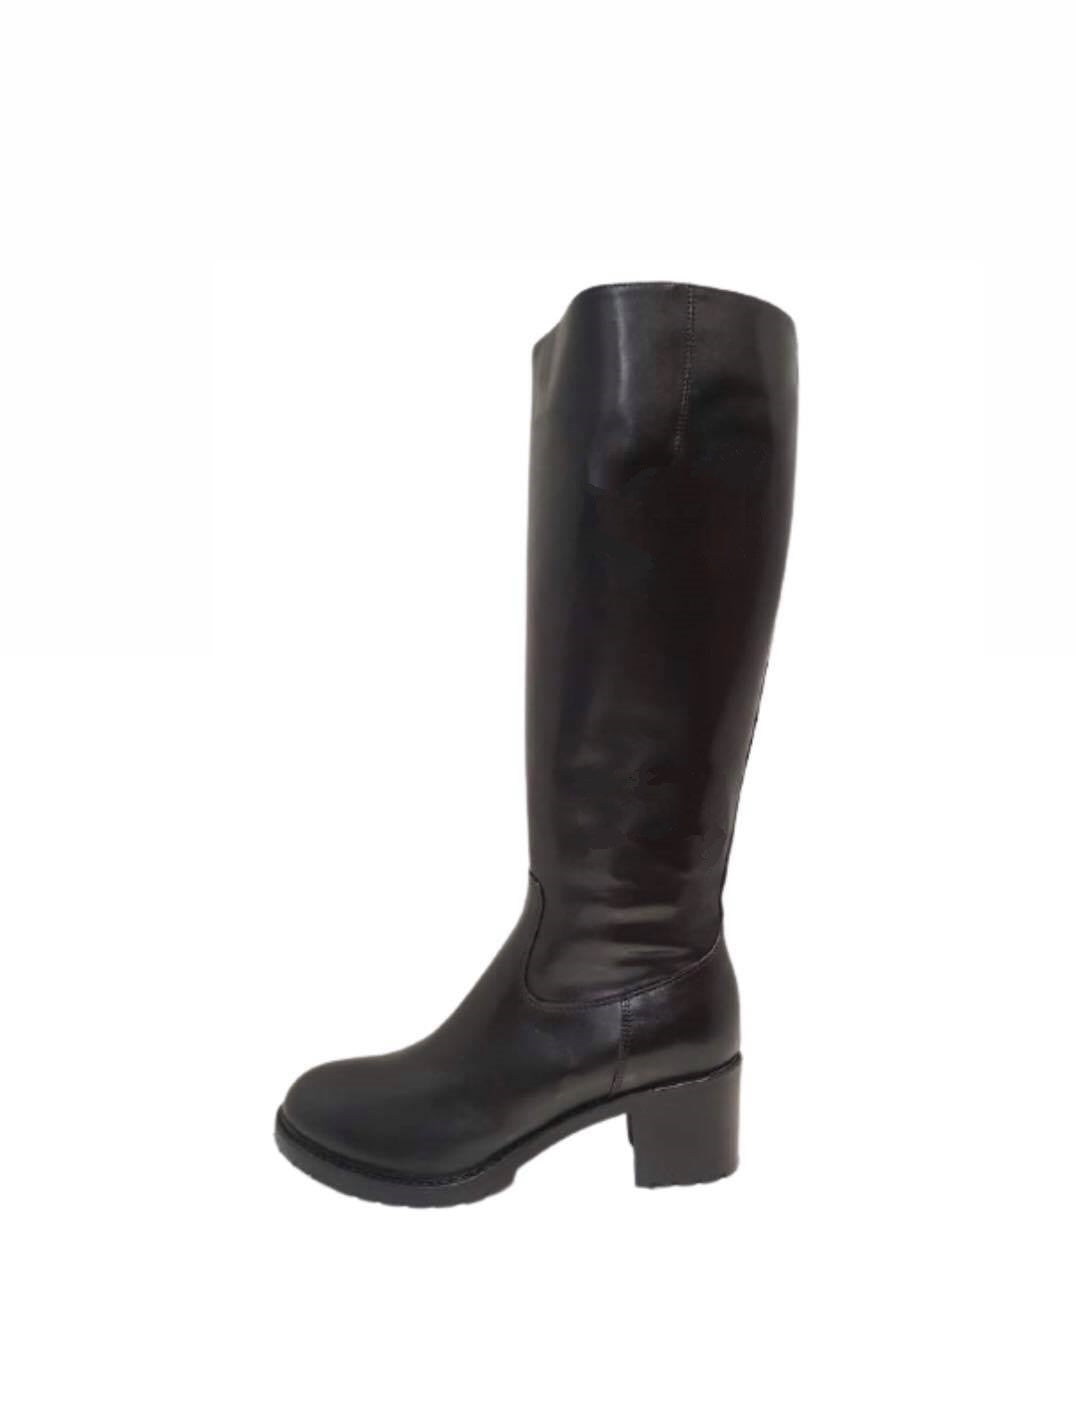 Progetto P270 Black Nero Knee High Zip Boot Made In Italy